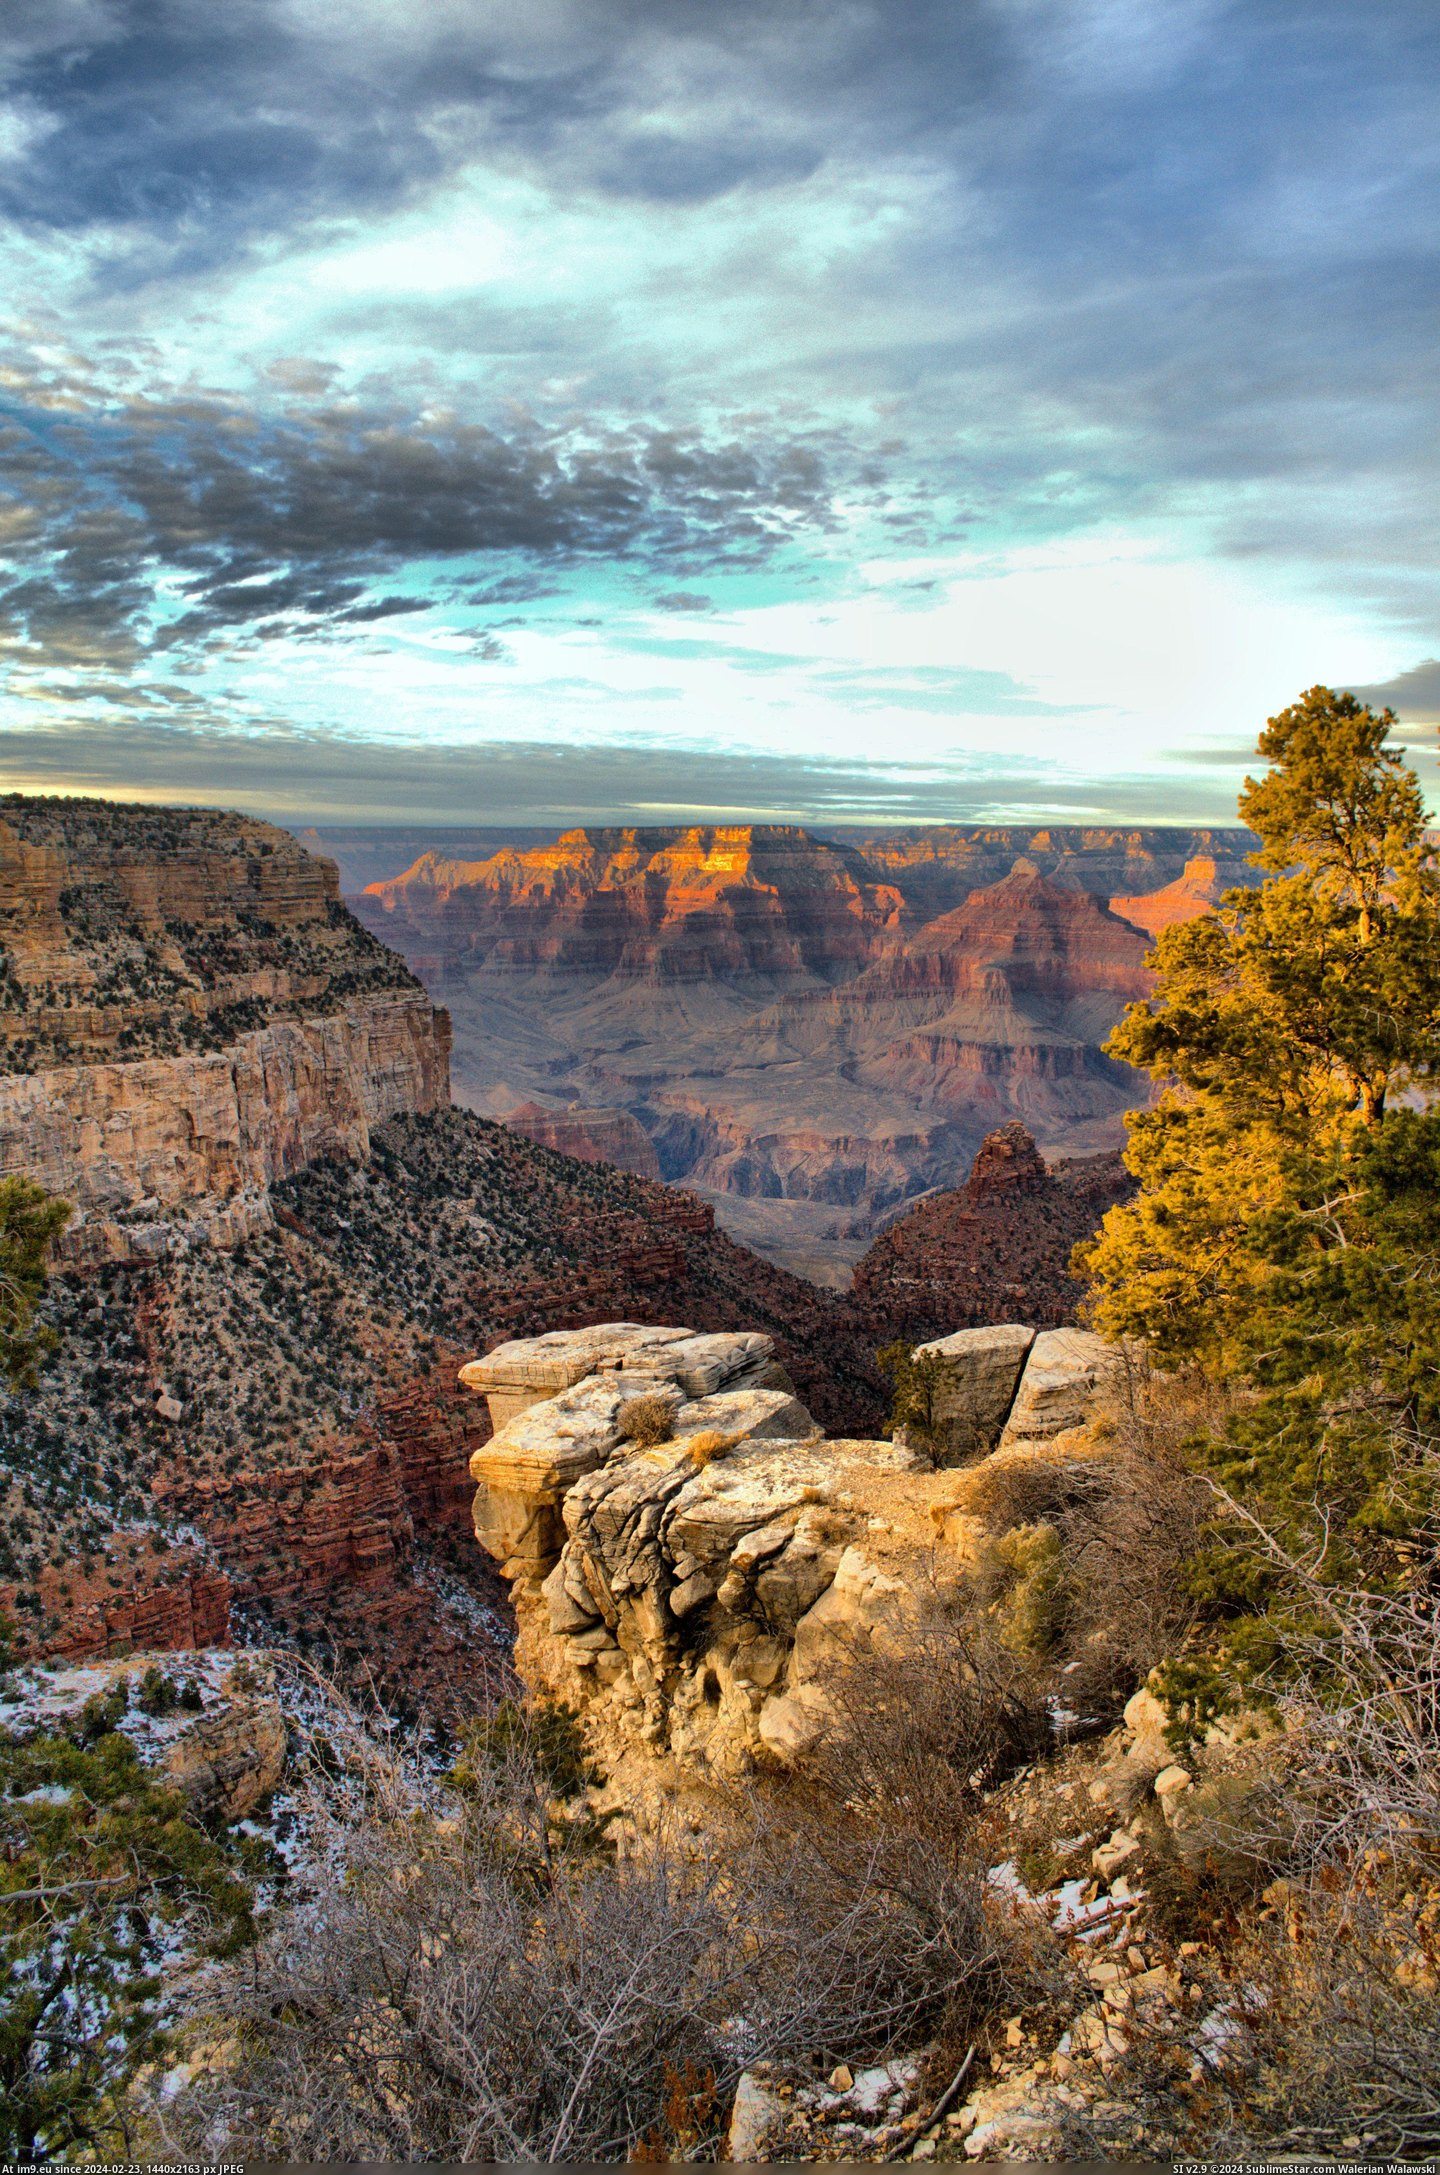 #Photo #One #Angel #Sunset #Trail #Bright #Bests #Personal #Winter #Canyon #Grand [Earthporn] A photo I took this winter at the Bright Angel Trail of the Grand Canyon during sunset. One of my personal bests. [O Pic. (Image of album My r/EARTHPORN favs))